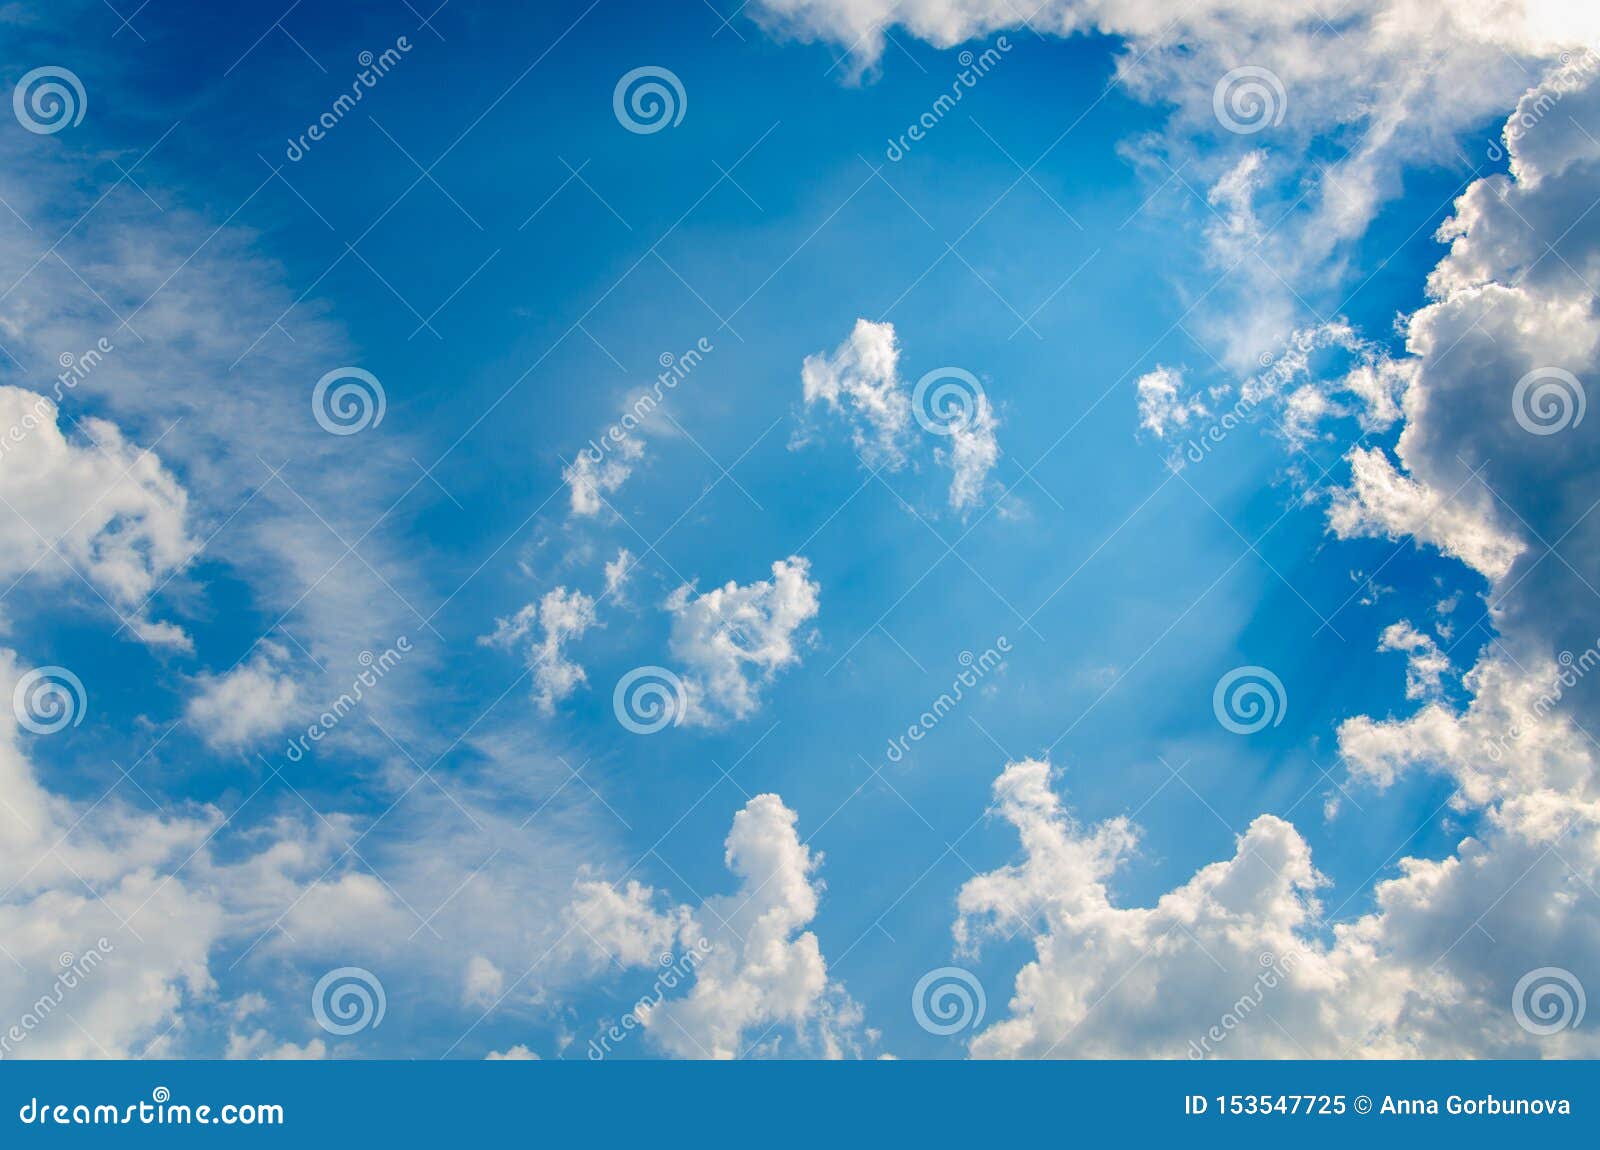 Blue Sky Background with Gray Fluffy Clouds Stock Image - Image of ...